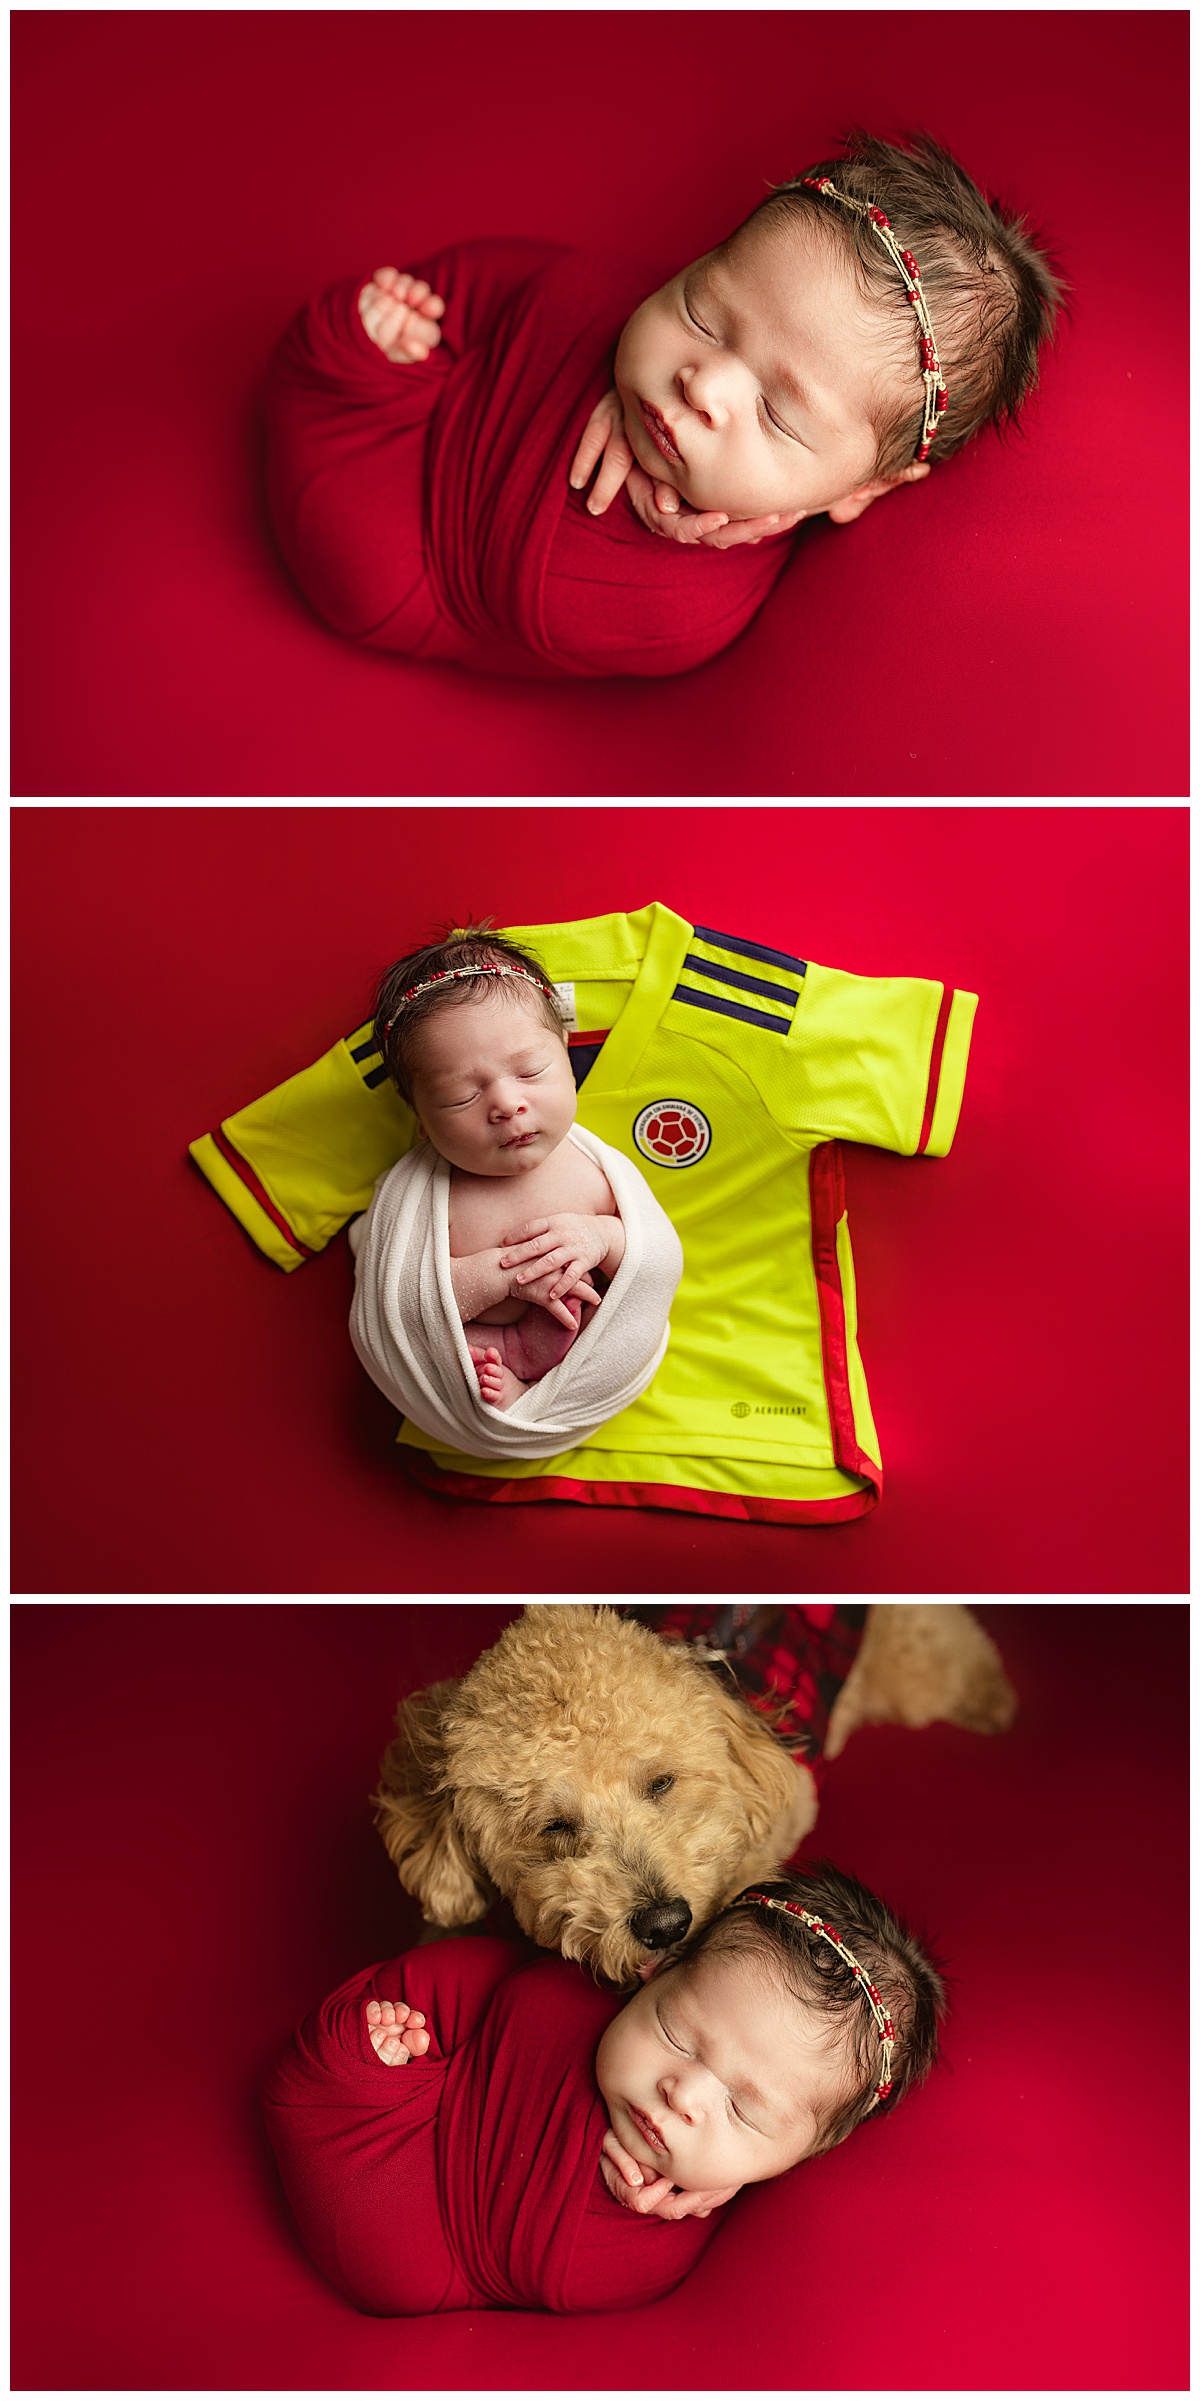 Infant lays on soccer jersey looking Posed and Perfect